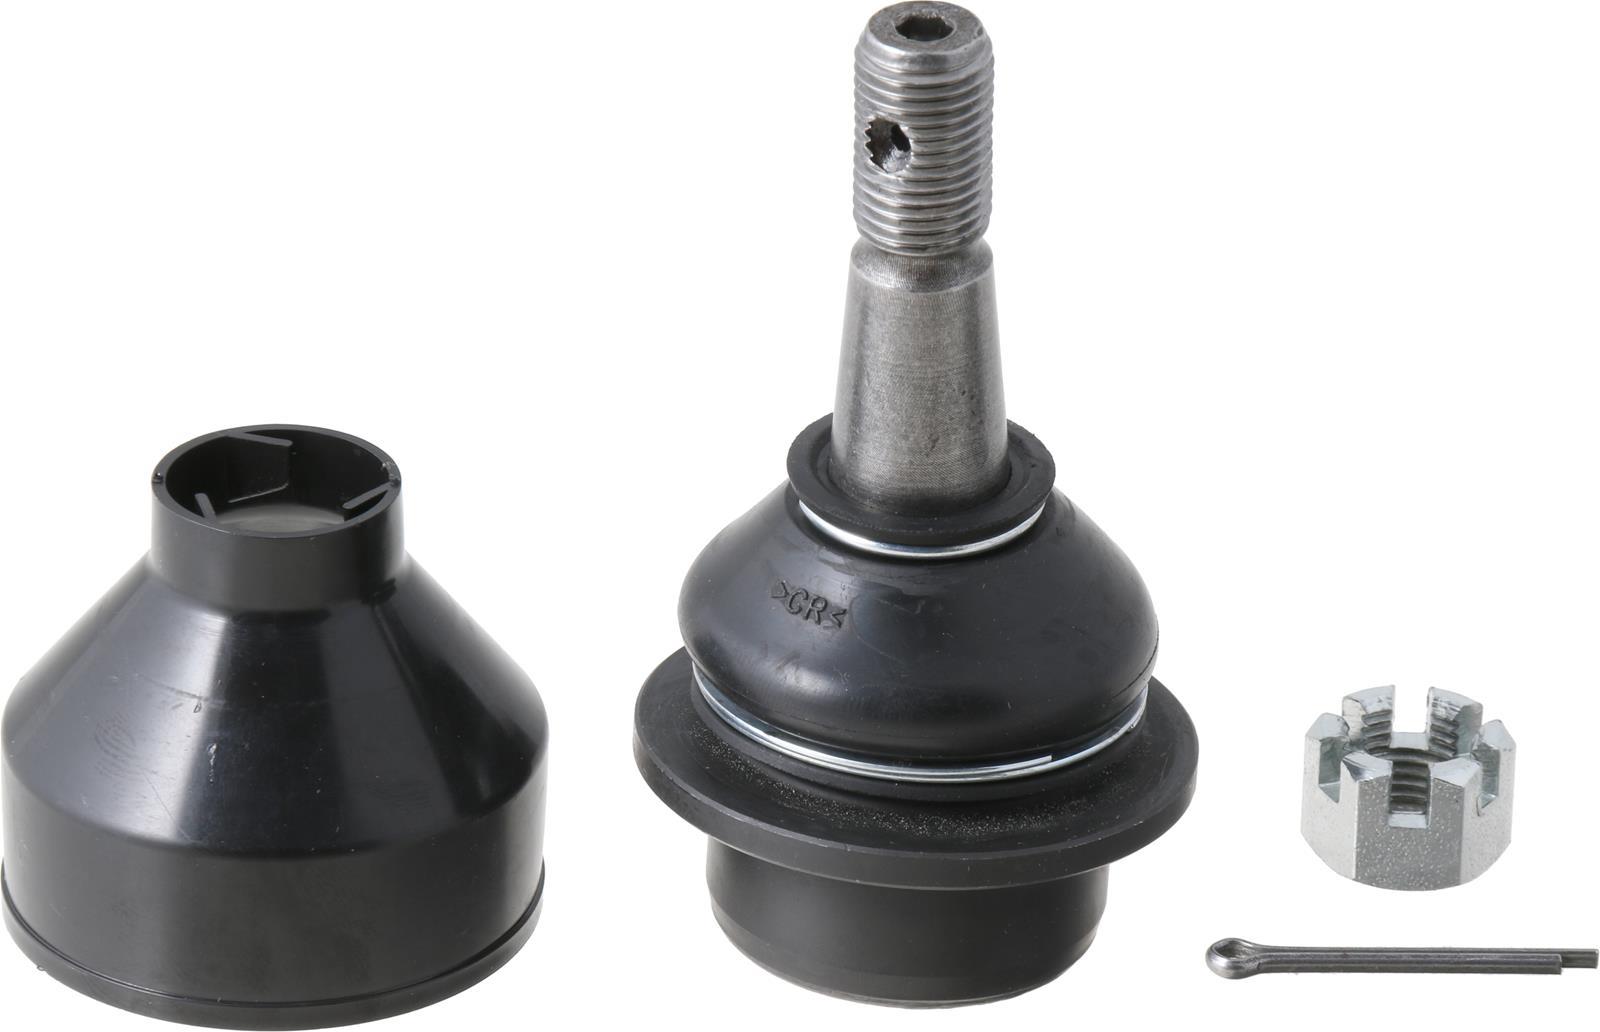 Dana-Spicer 10048946 Ball Joints, Front, Includes Upper and Lower, Hardware Included, Jeep Wrangler JL 2018-22, Kit